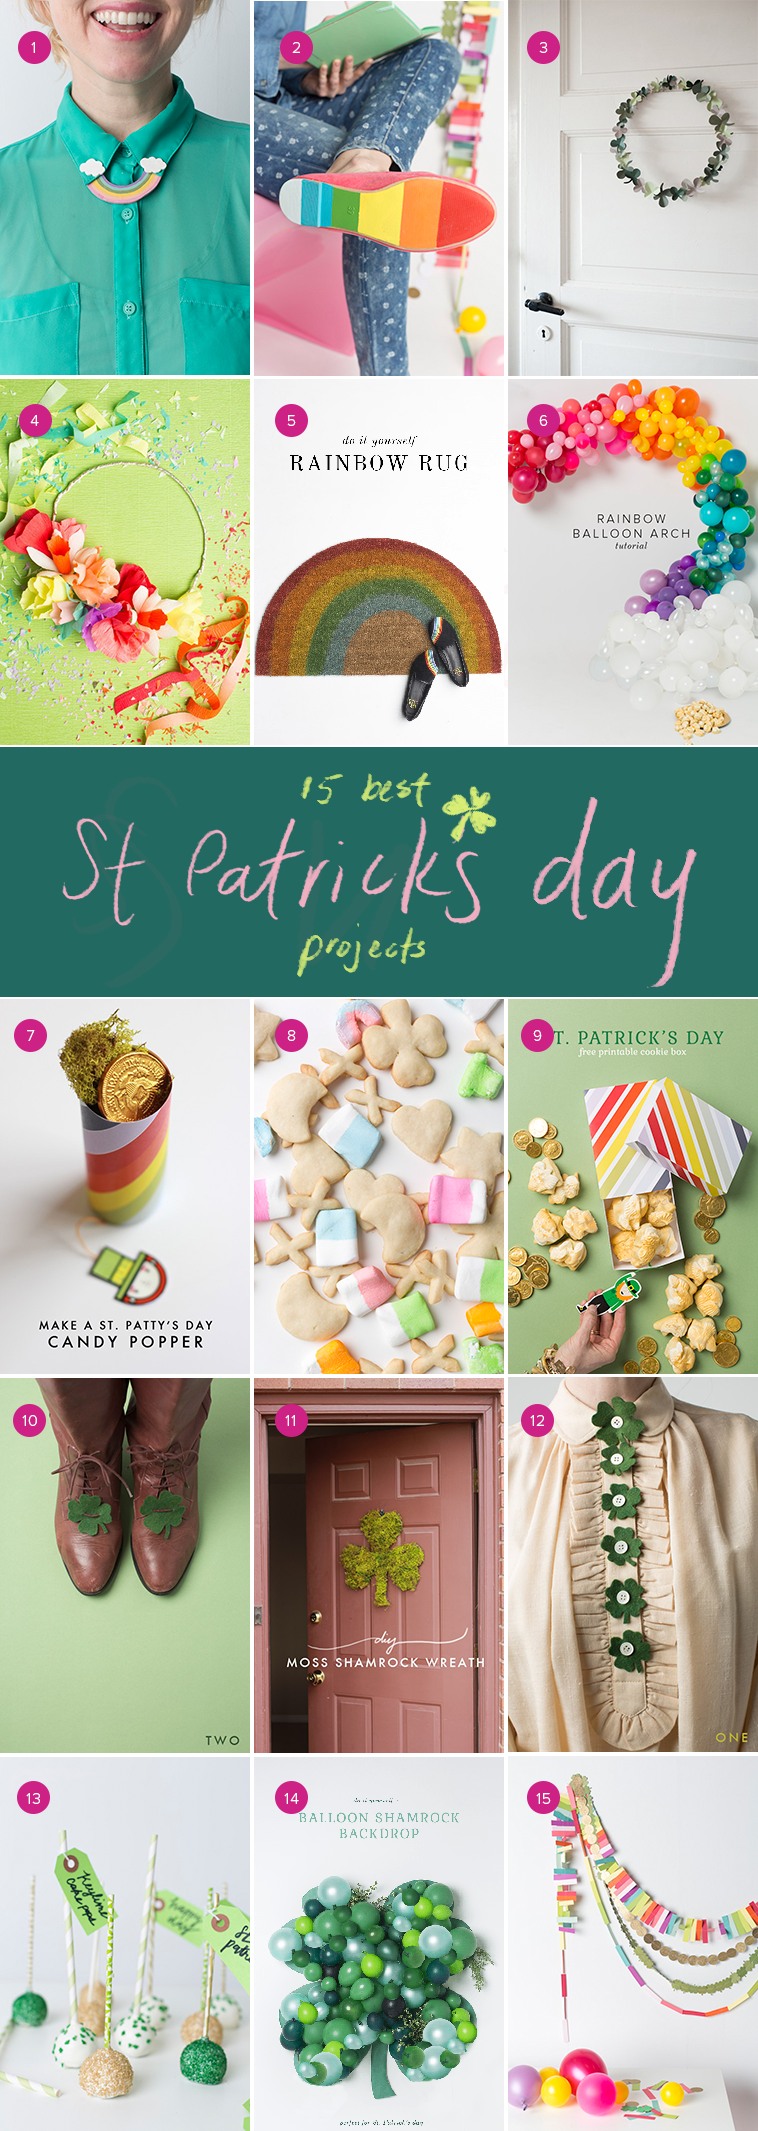 15-best-st-patricks-day-projects